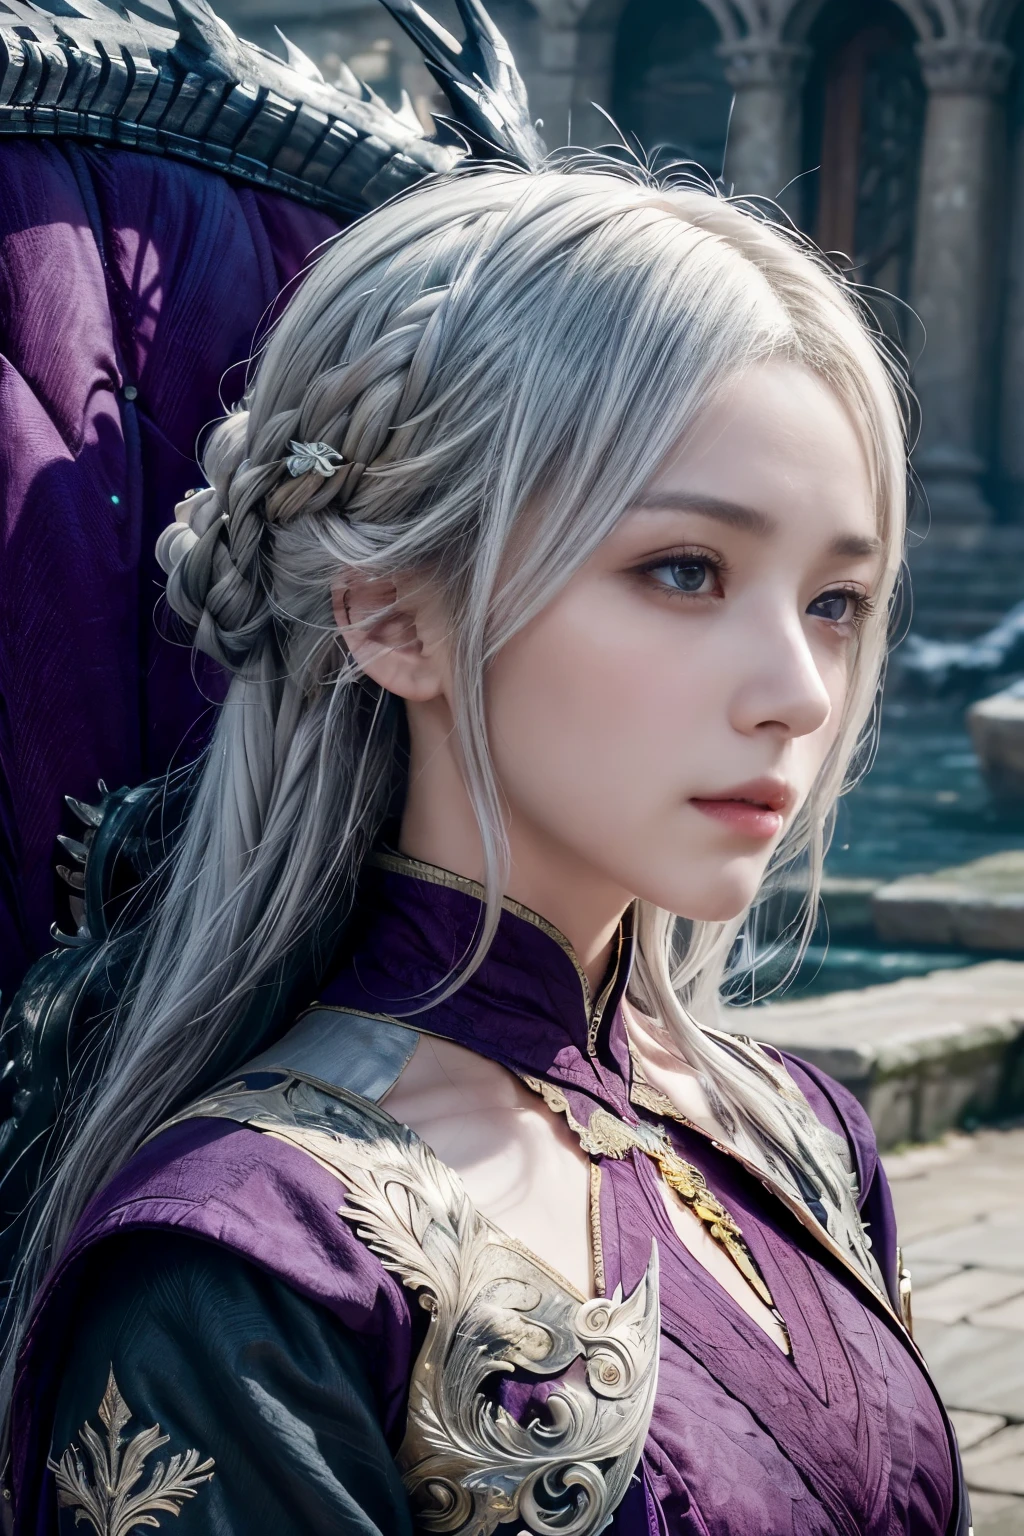 (close up:1.3), official art, masterpiece, best quality, unity 8k wallpaper, ultra detailed, extremely detailed, elegant, beautiful, aesthetic, romanticism, 1girl,  Dragon Mother, flowing silver hair cascading down her back, piercing violet eyes lined with determination and compassion, and three majestic dragons, perched beside her in allegiance. The vivid colors and lifelike textures bring this regal figure and her magnificent creatures to vivid life, drawing viewers into the fantastical world of Westeros